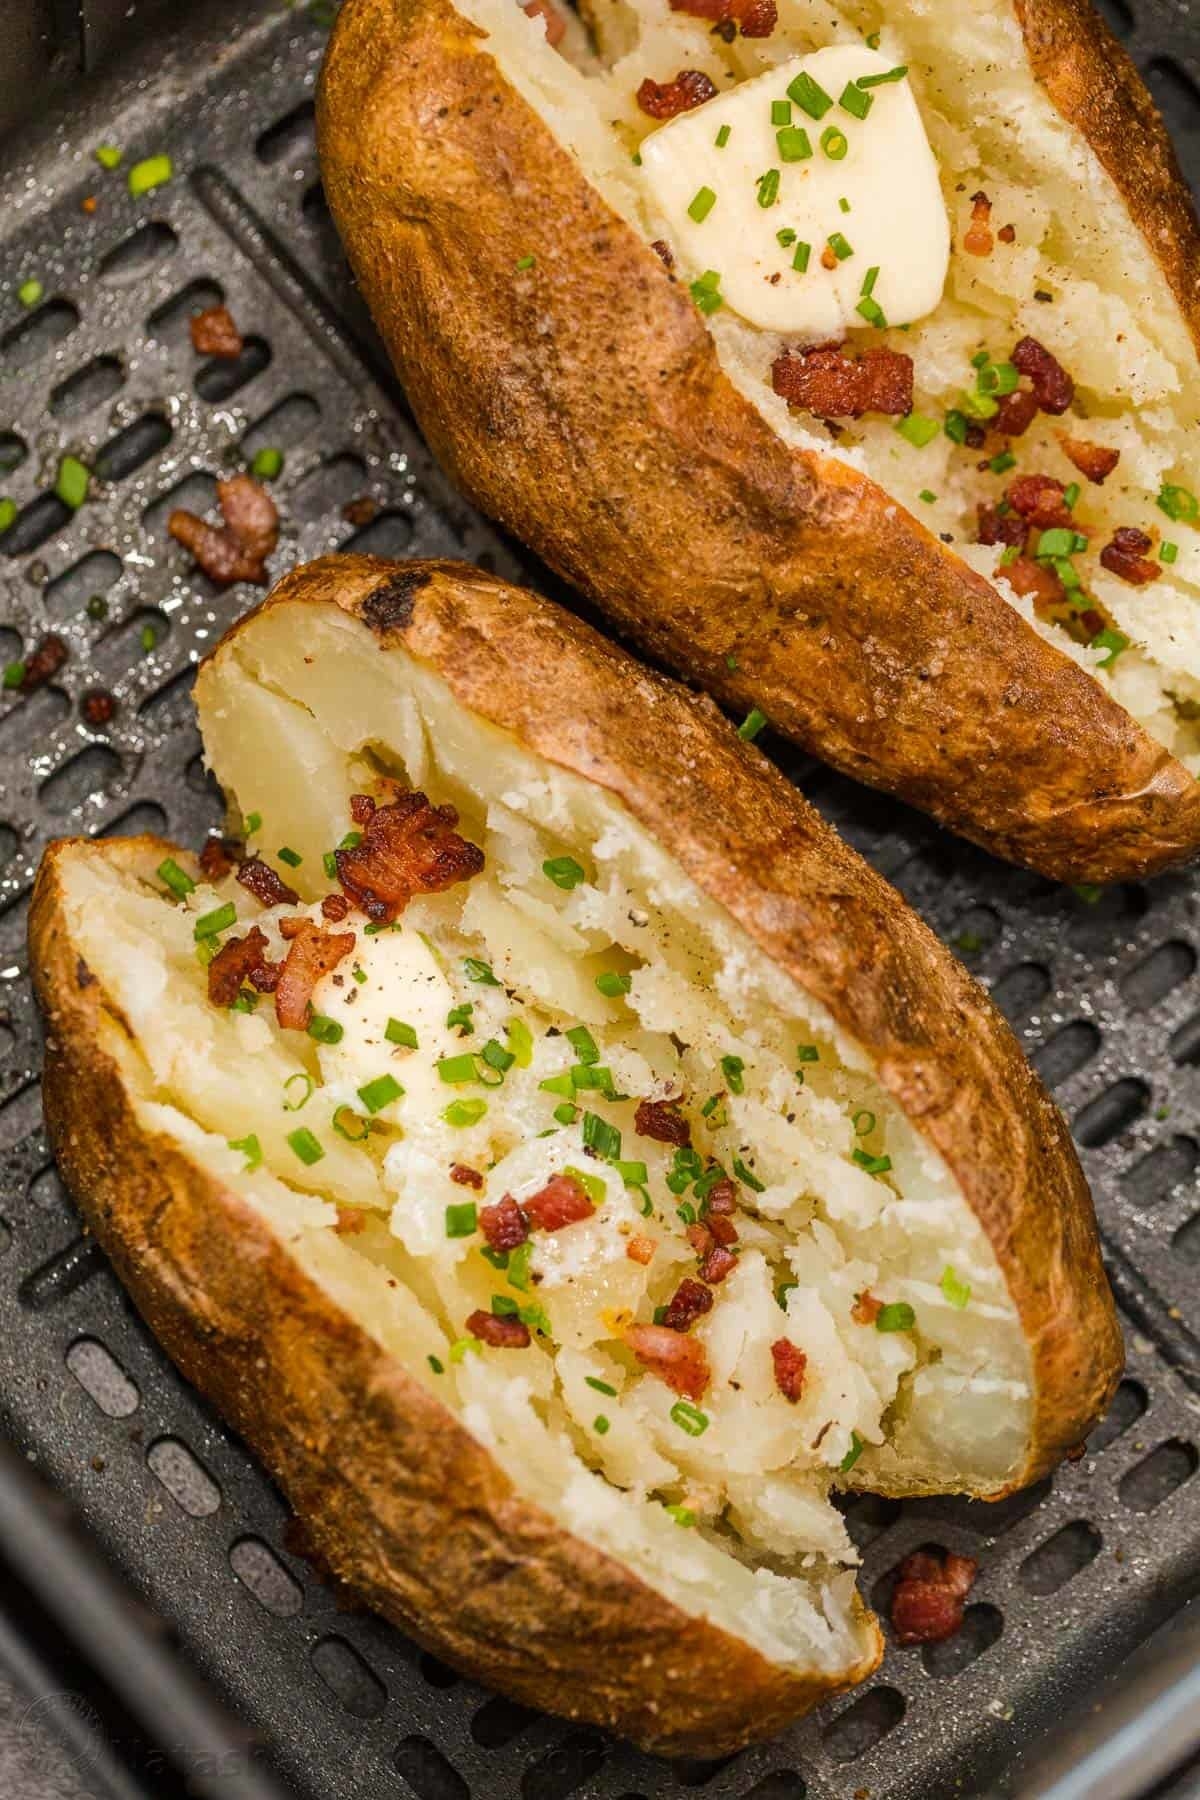 A baked potato in the air fryer.